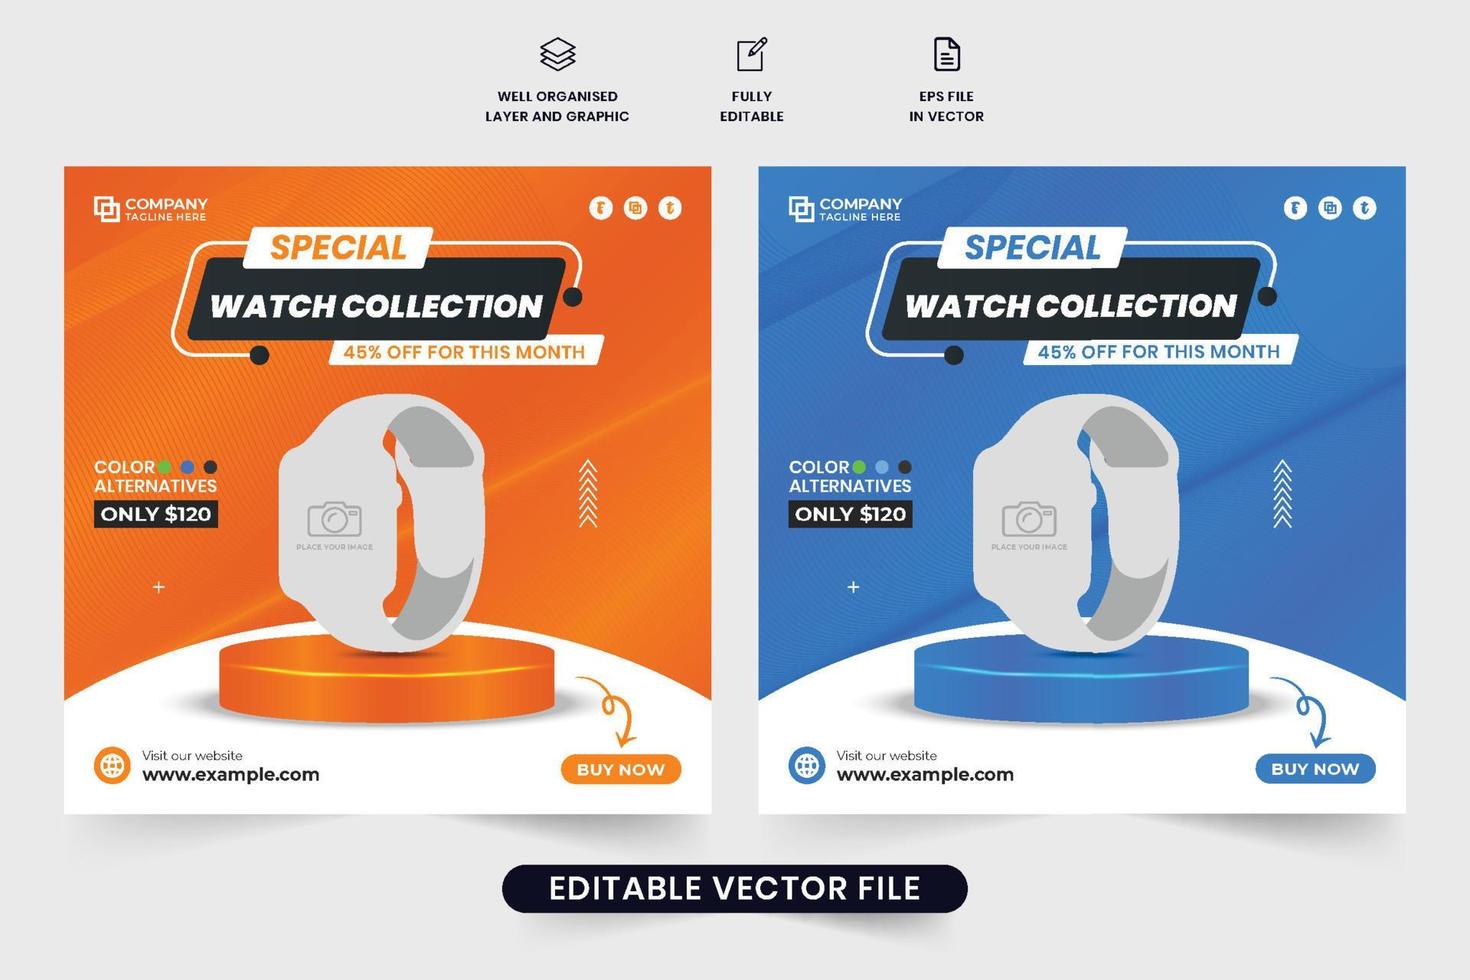 Wristwatch sale template for social media marketing with orange and blue colors. Smartwatch sale business promotional template vector with photo placeholders. Modern watch advertisement poster design.